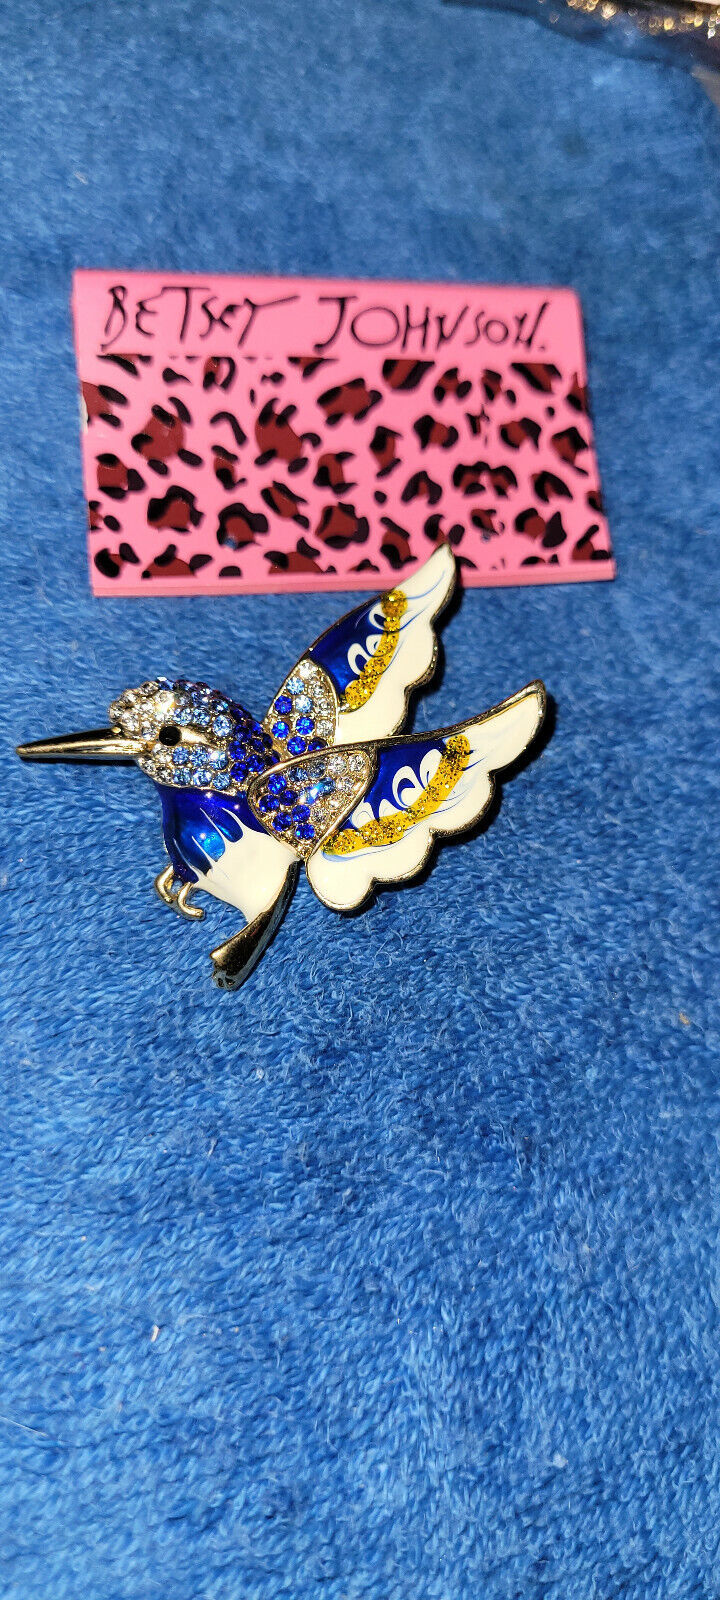 Primary image for New Betsey Johnson Brooch Hummingbird Blue Pretty Collectible Decorative Shiny